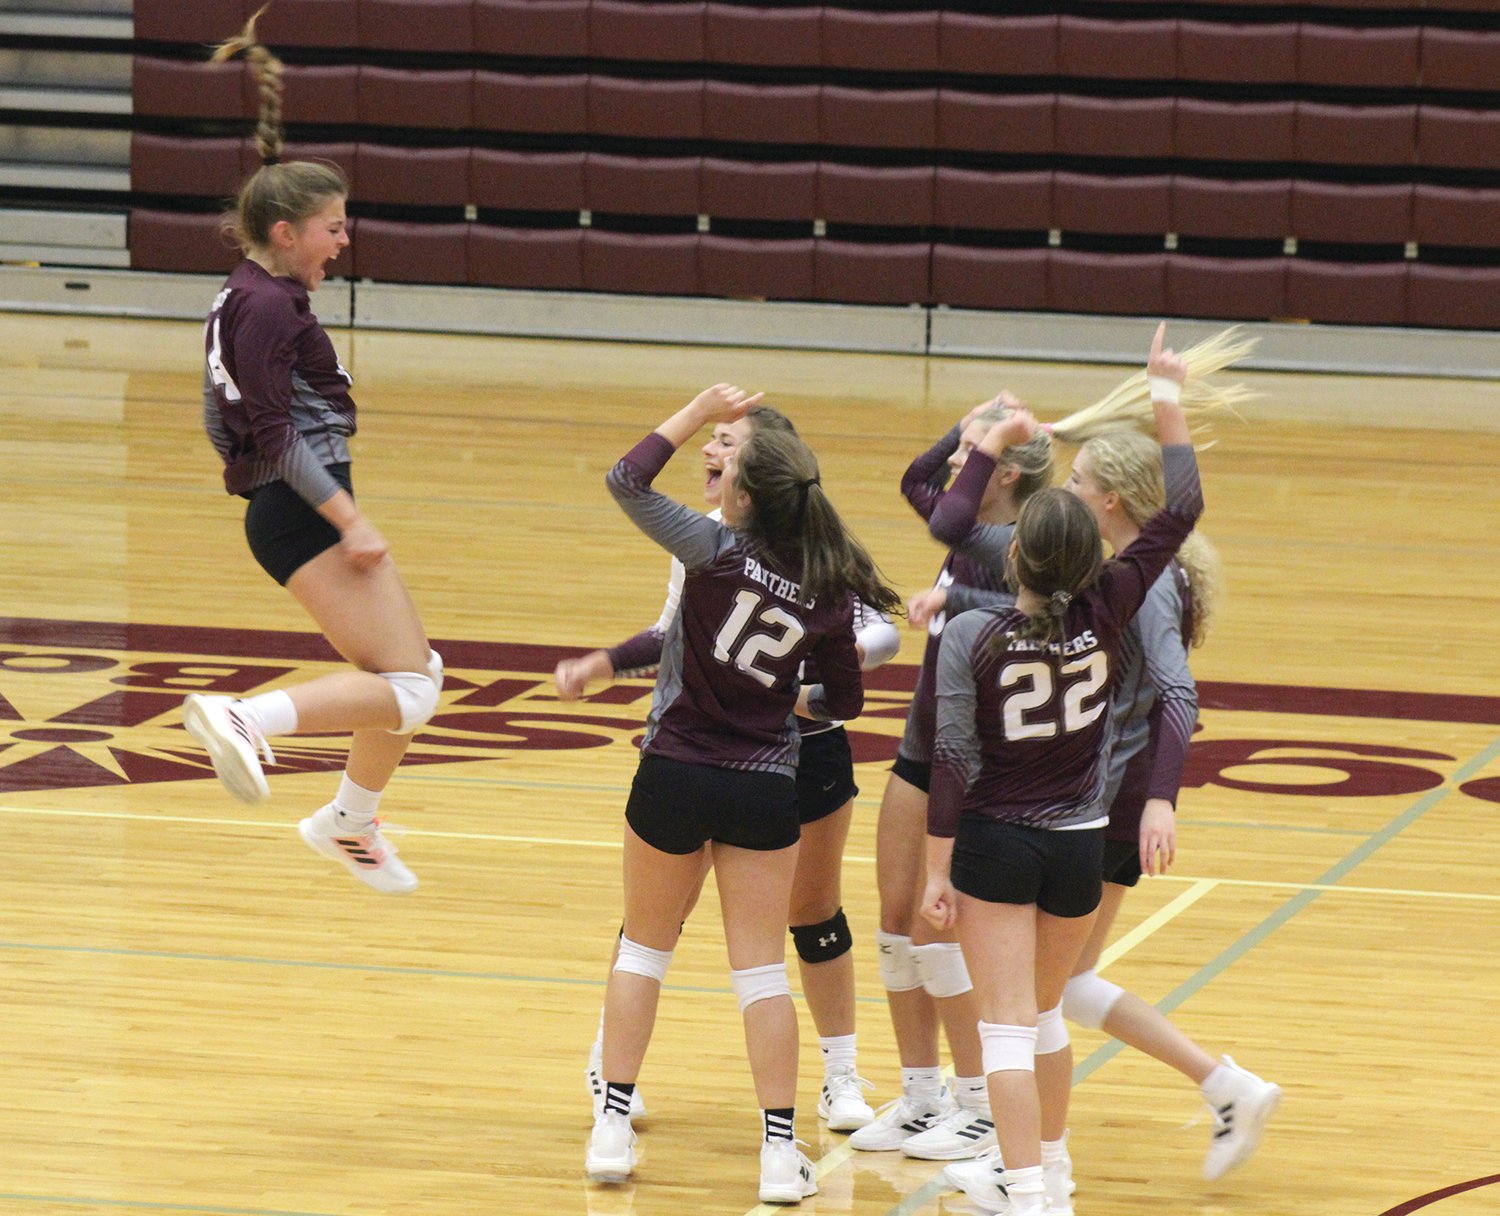 Mountain Grove’s Reagan Hoerning celebrates with her teammates after an ace against Strafford.